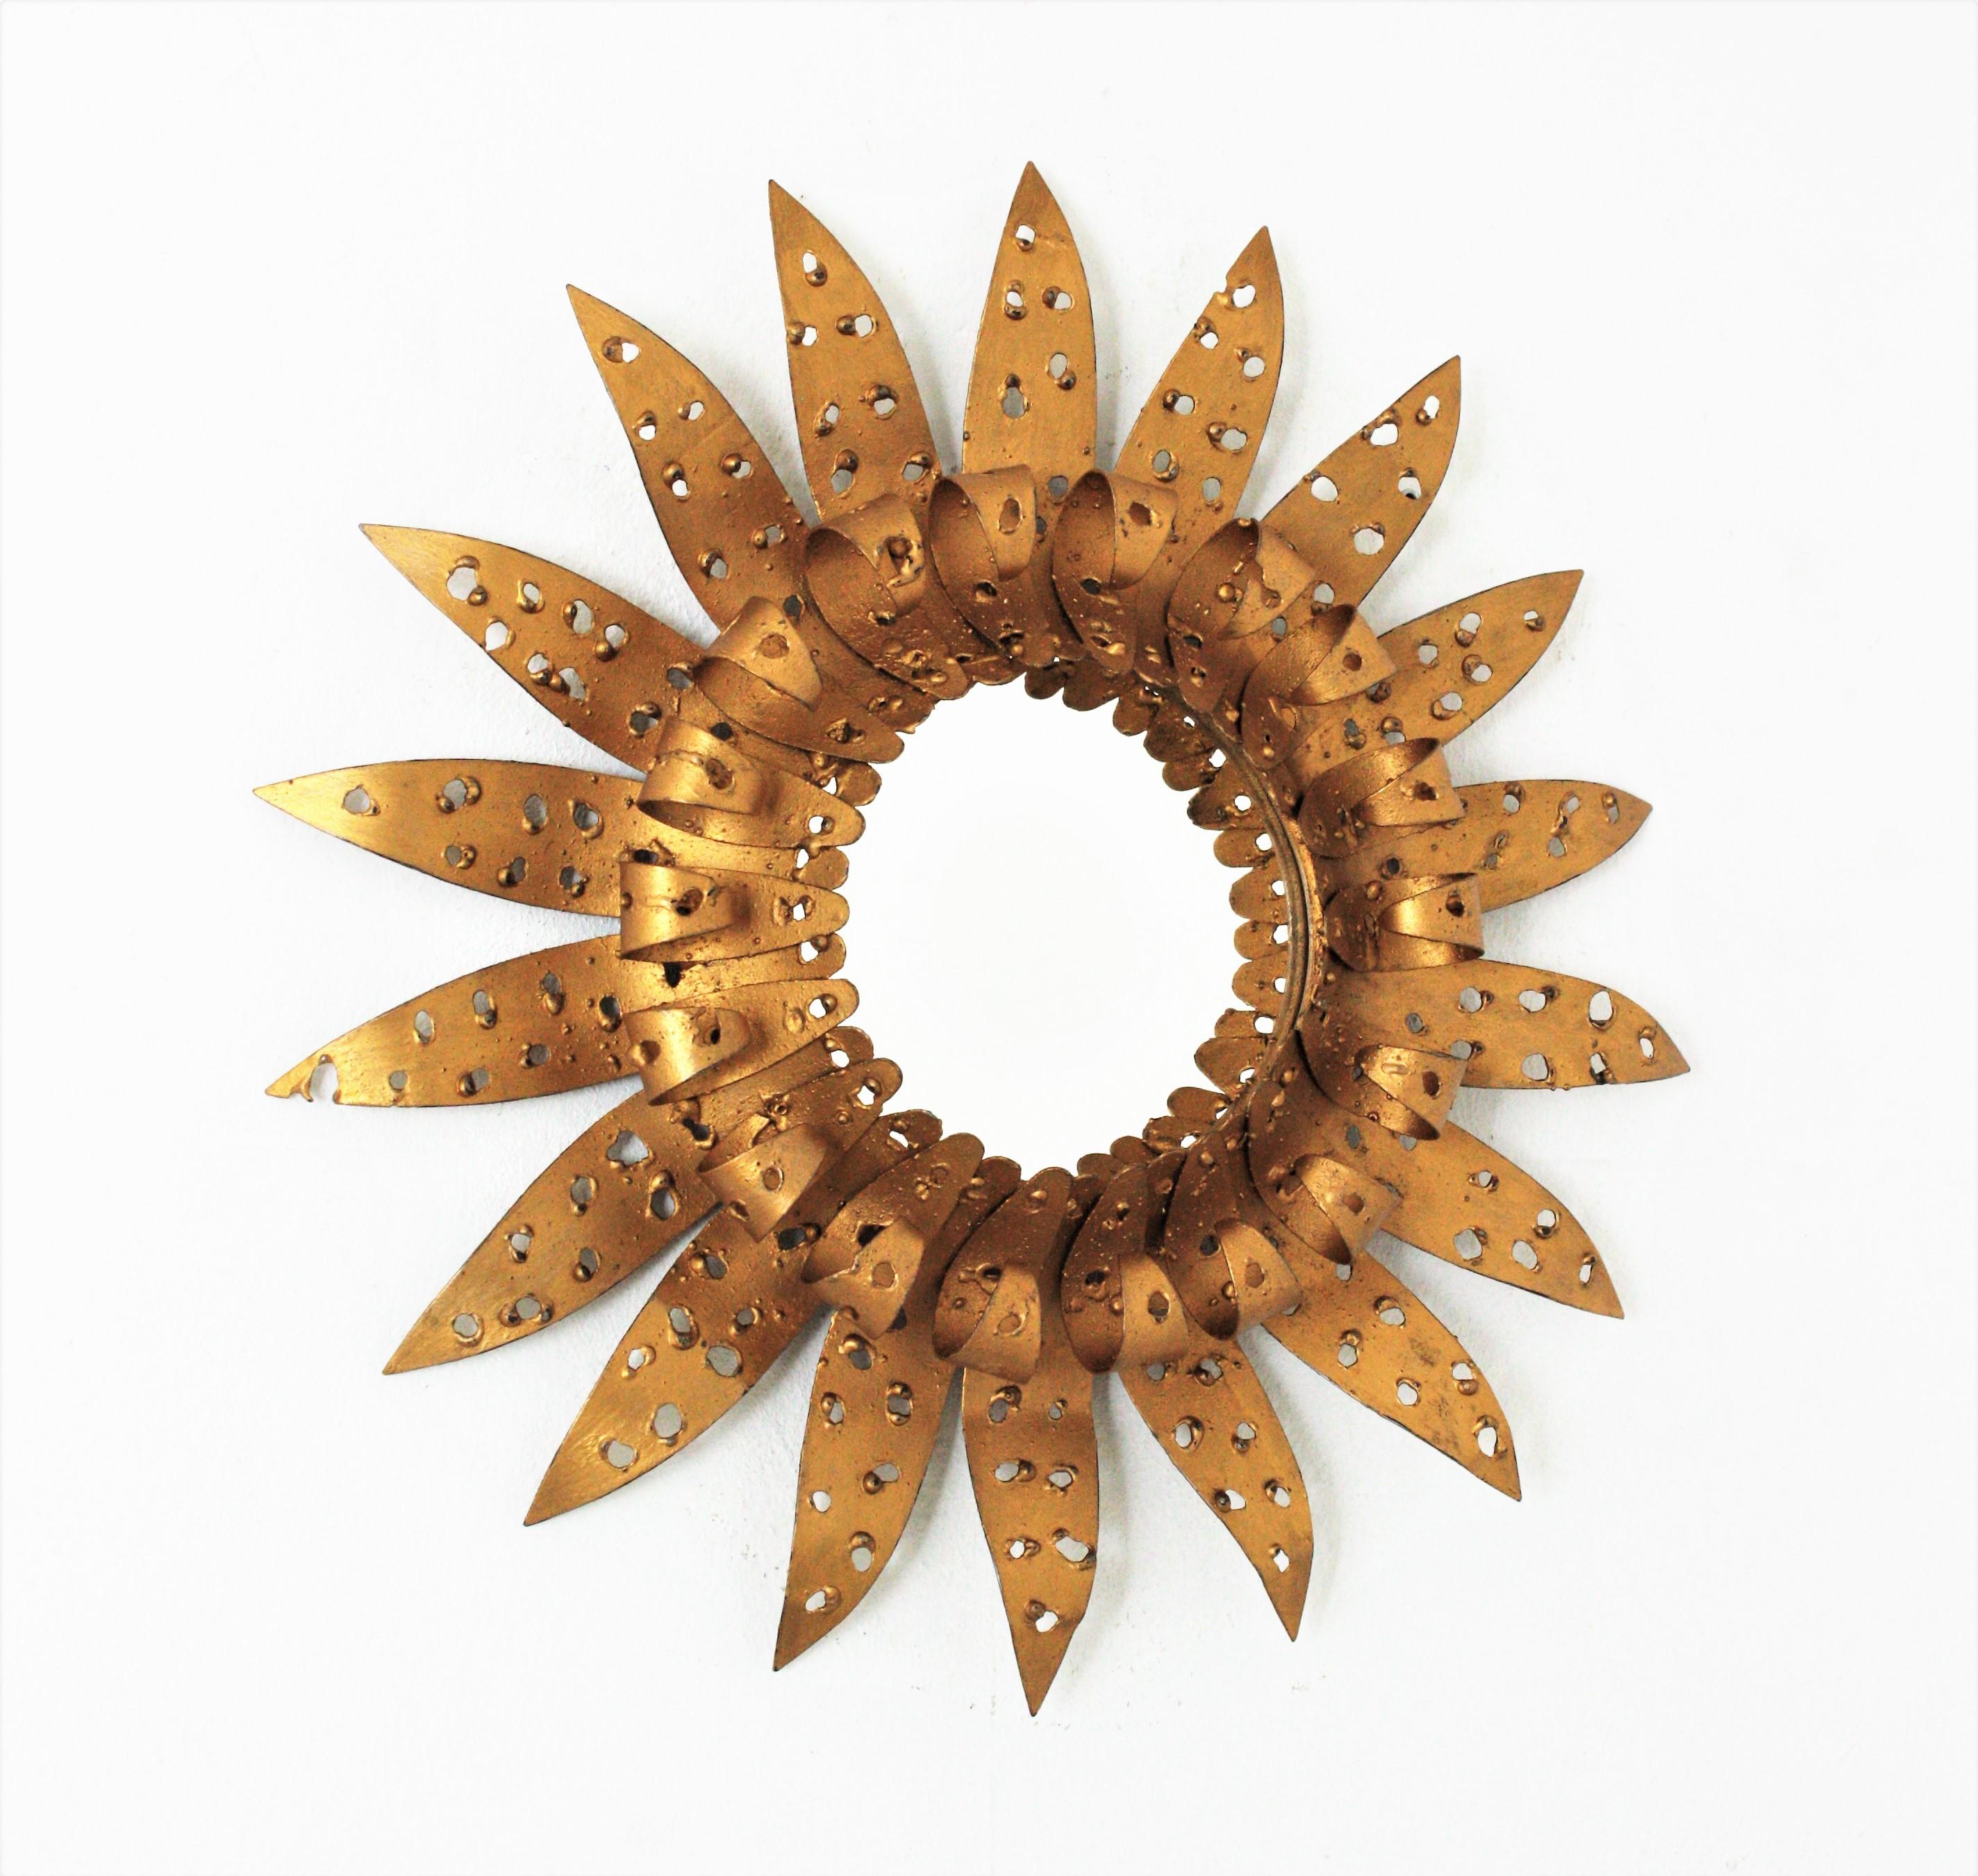 French Brutalist gilt metal sunburst mirror, 1950-1960.
Unusual brutalist perforated iron sunburst mirror with eyelash rays surrounding the glass.
This sunburst mirror has perforations thorough, this brutalist design marks the difference.
Beautiful